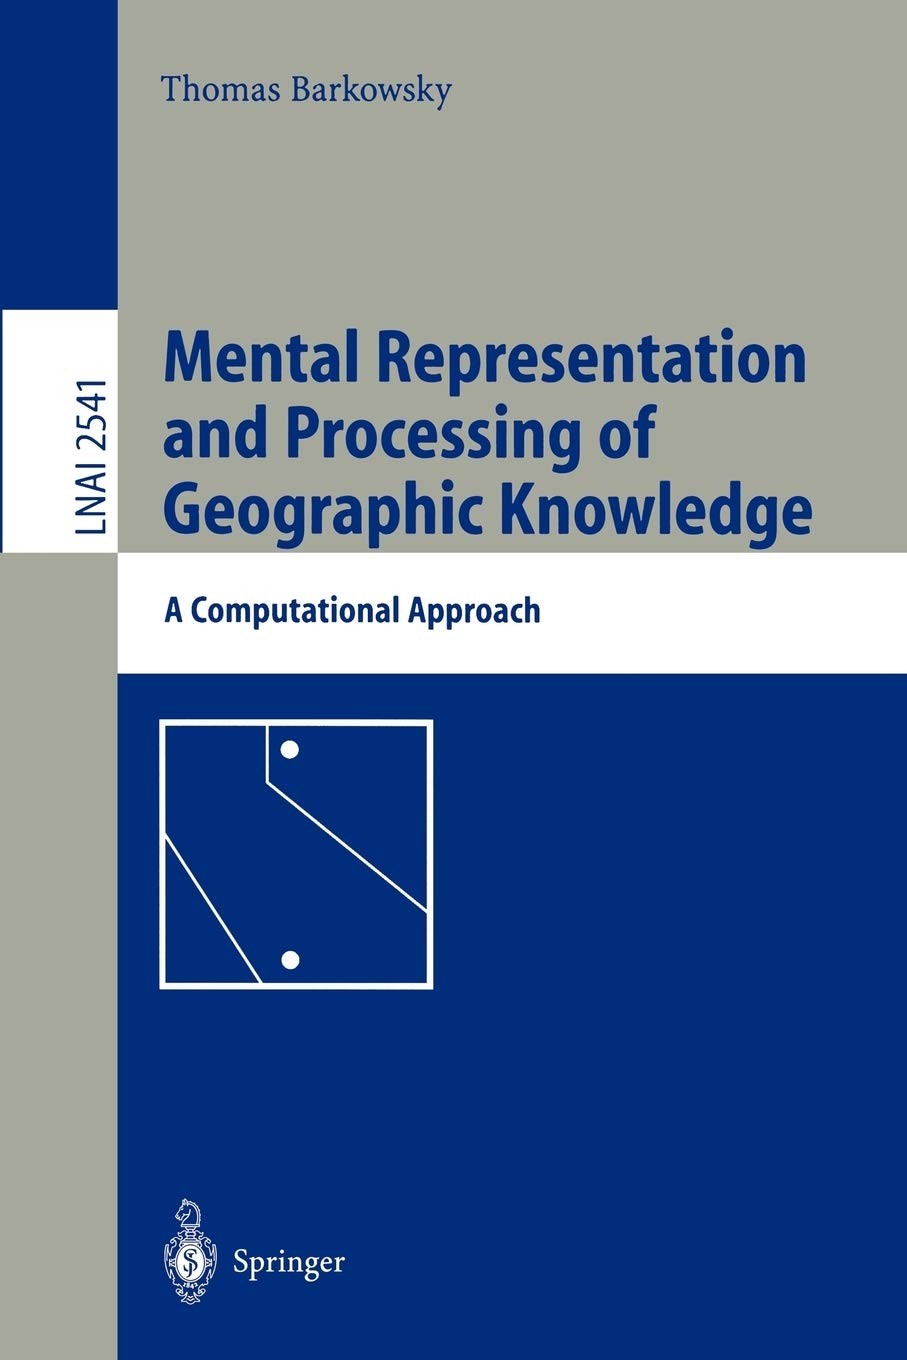 Mental Representation and Processing of Geographic Knowledge: A Computational Approach